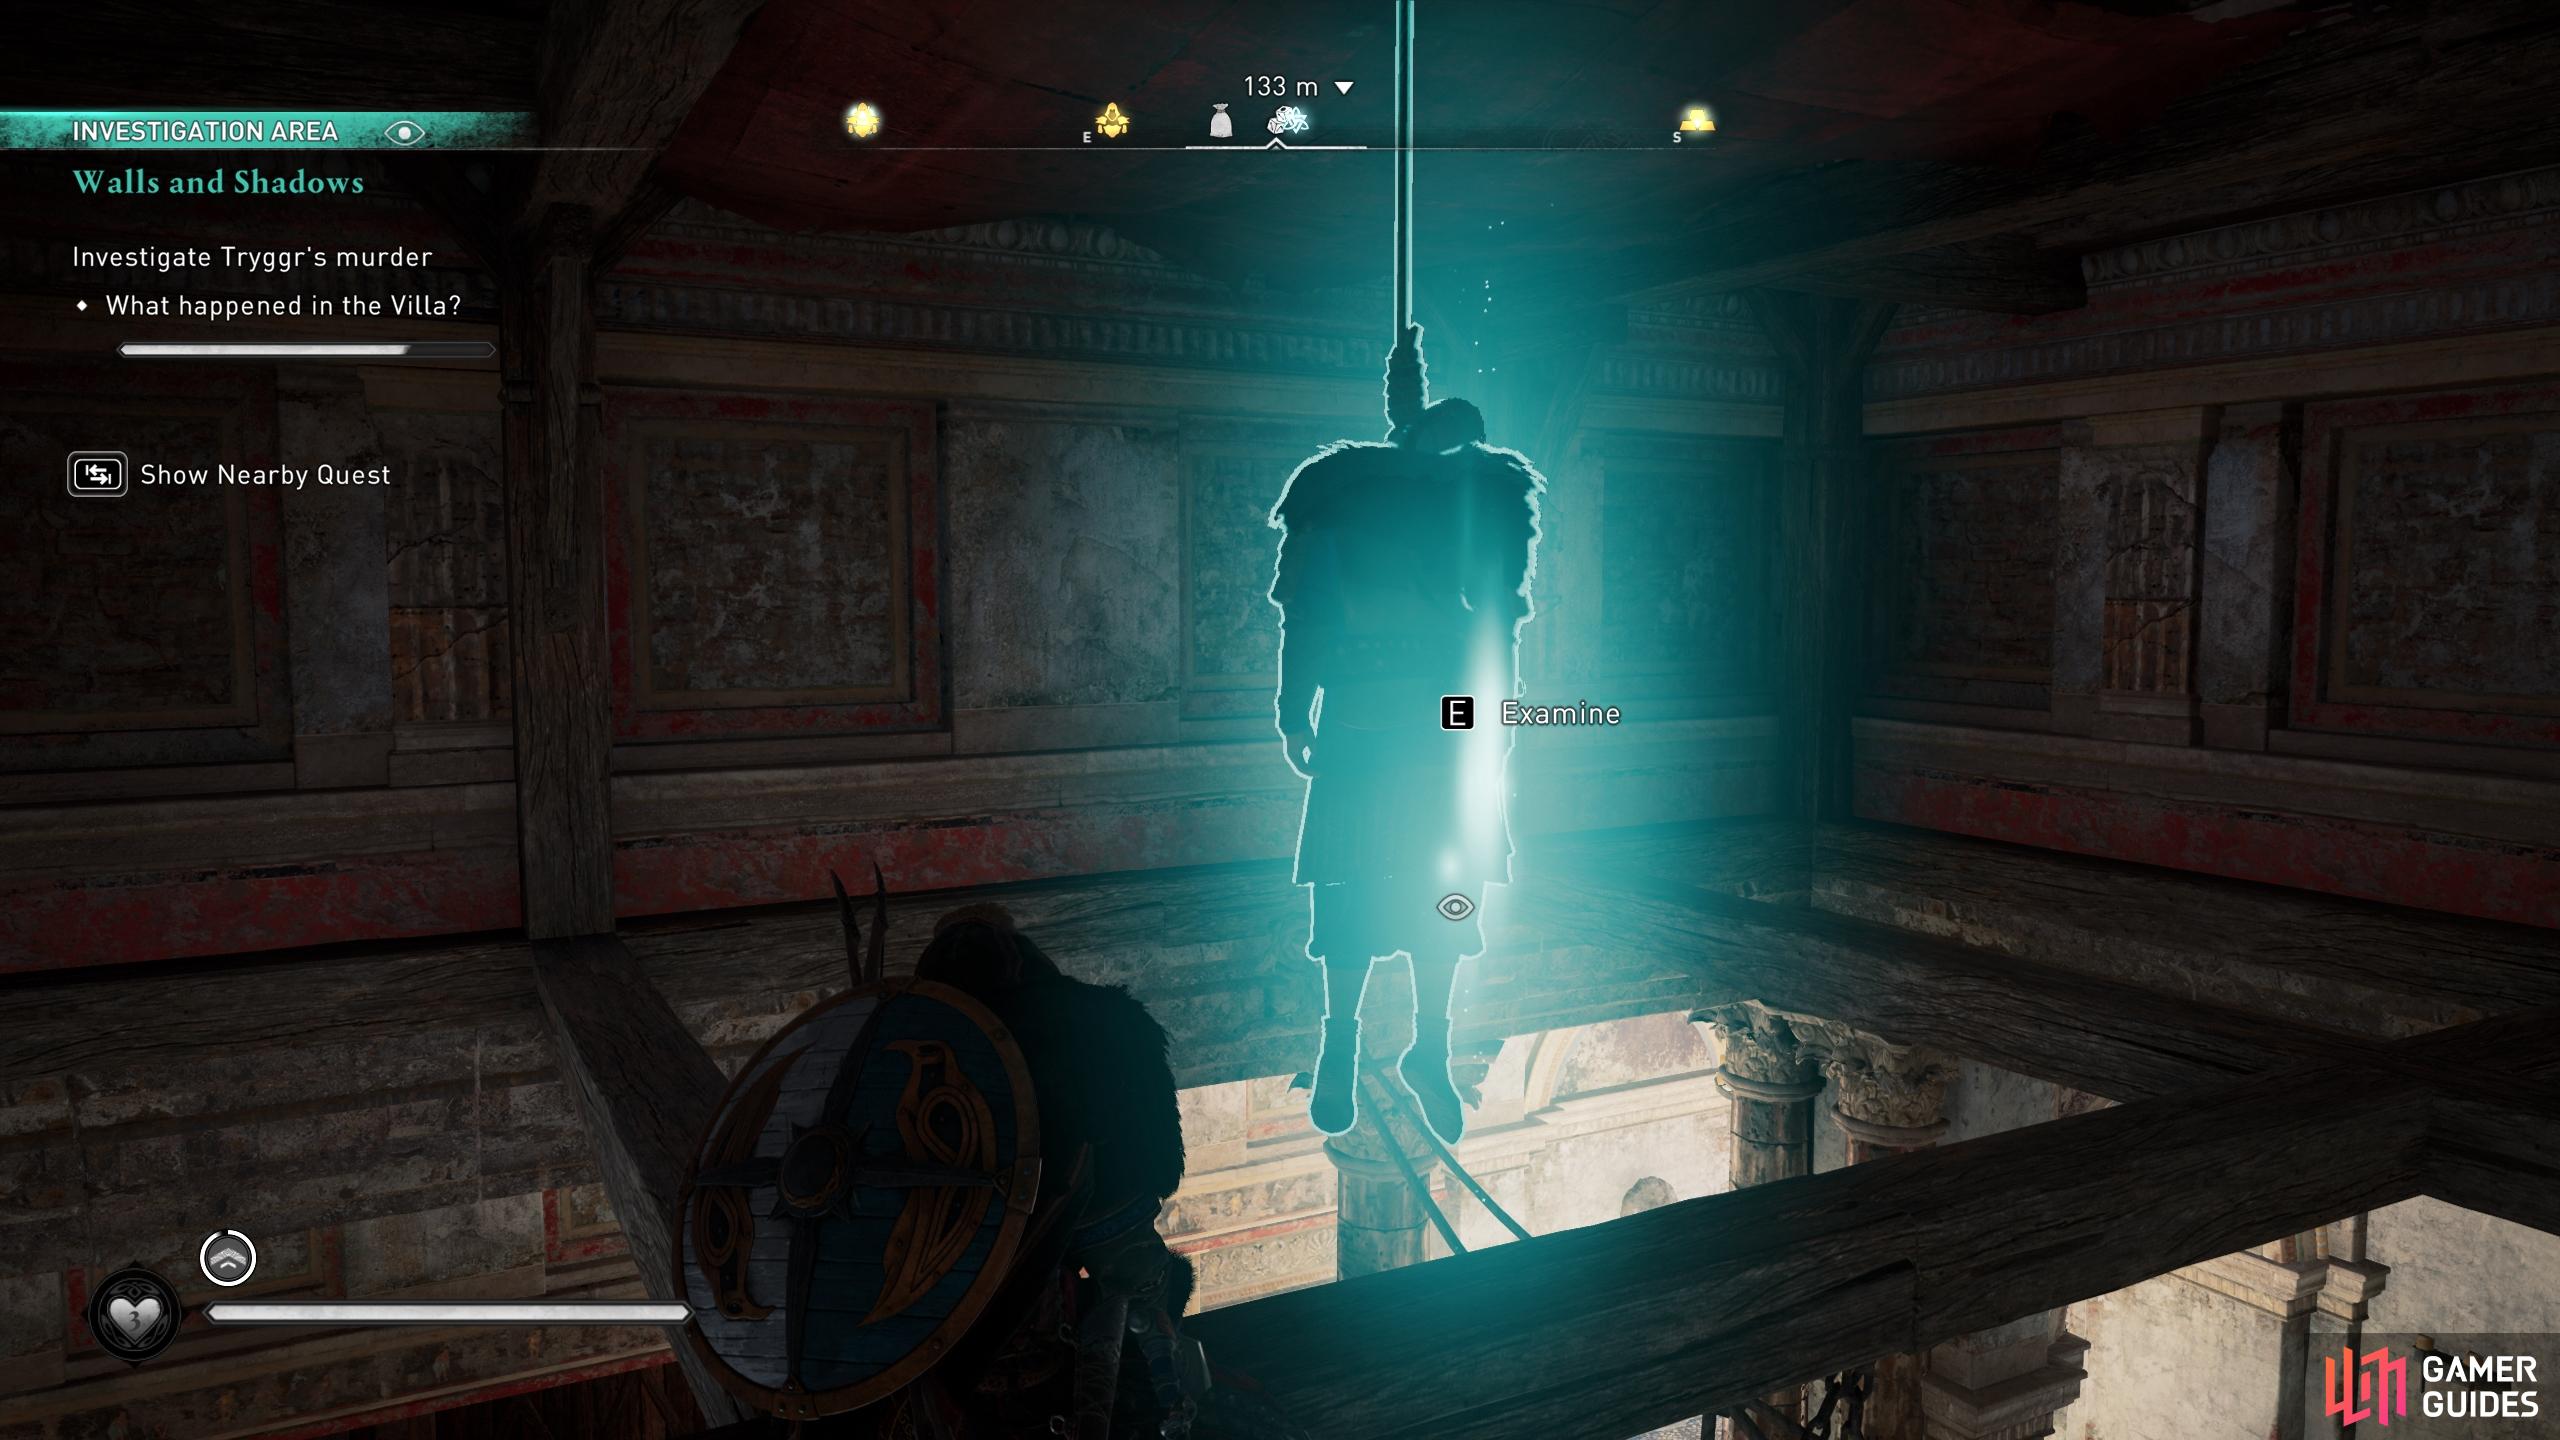 The final clue can be found above you in the form of a hanged guard.